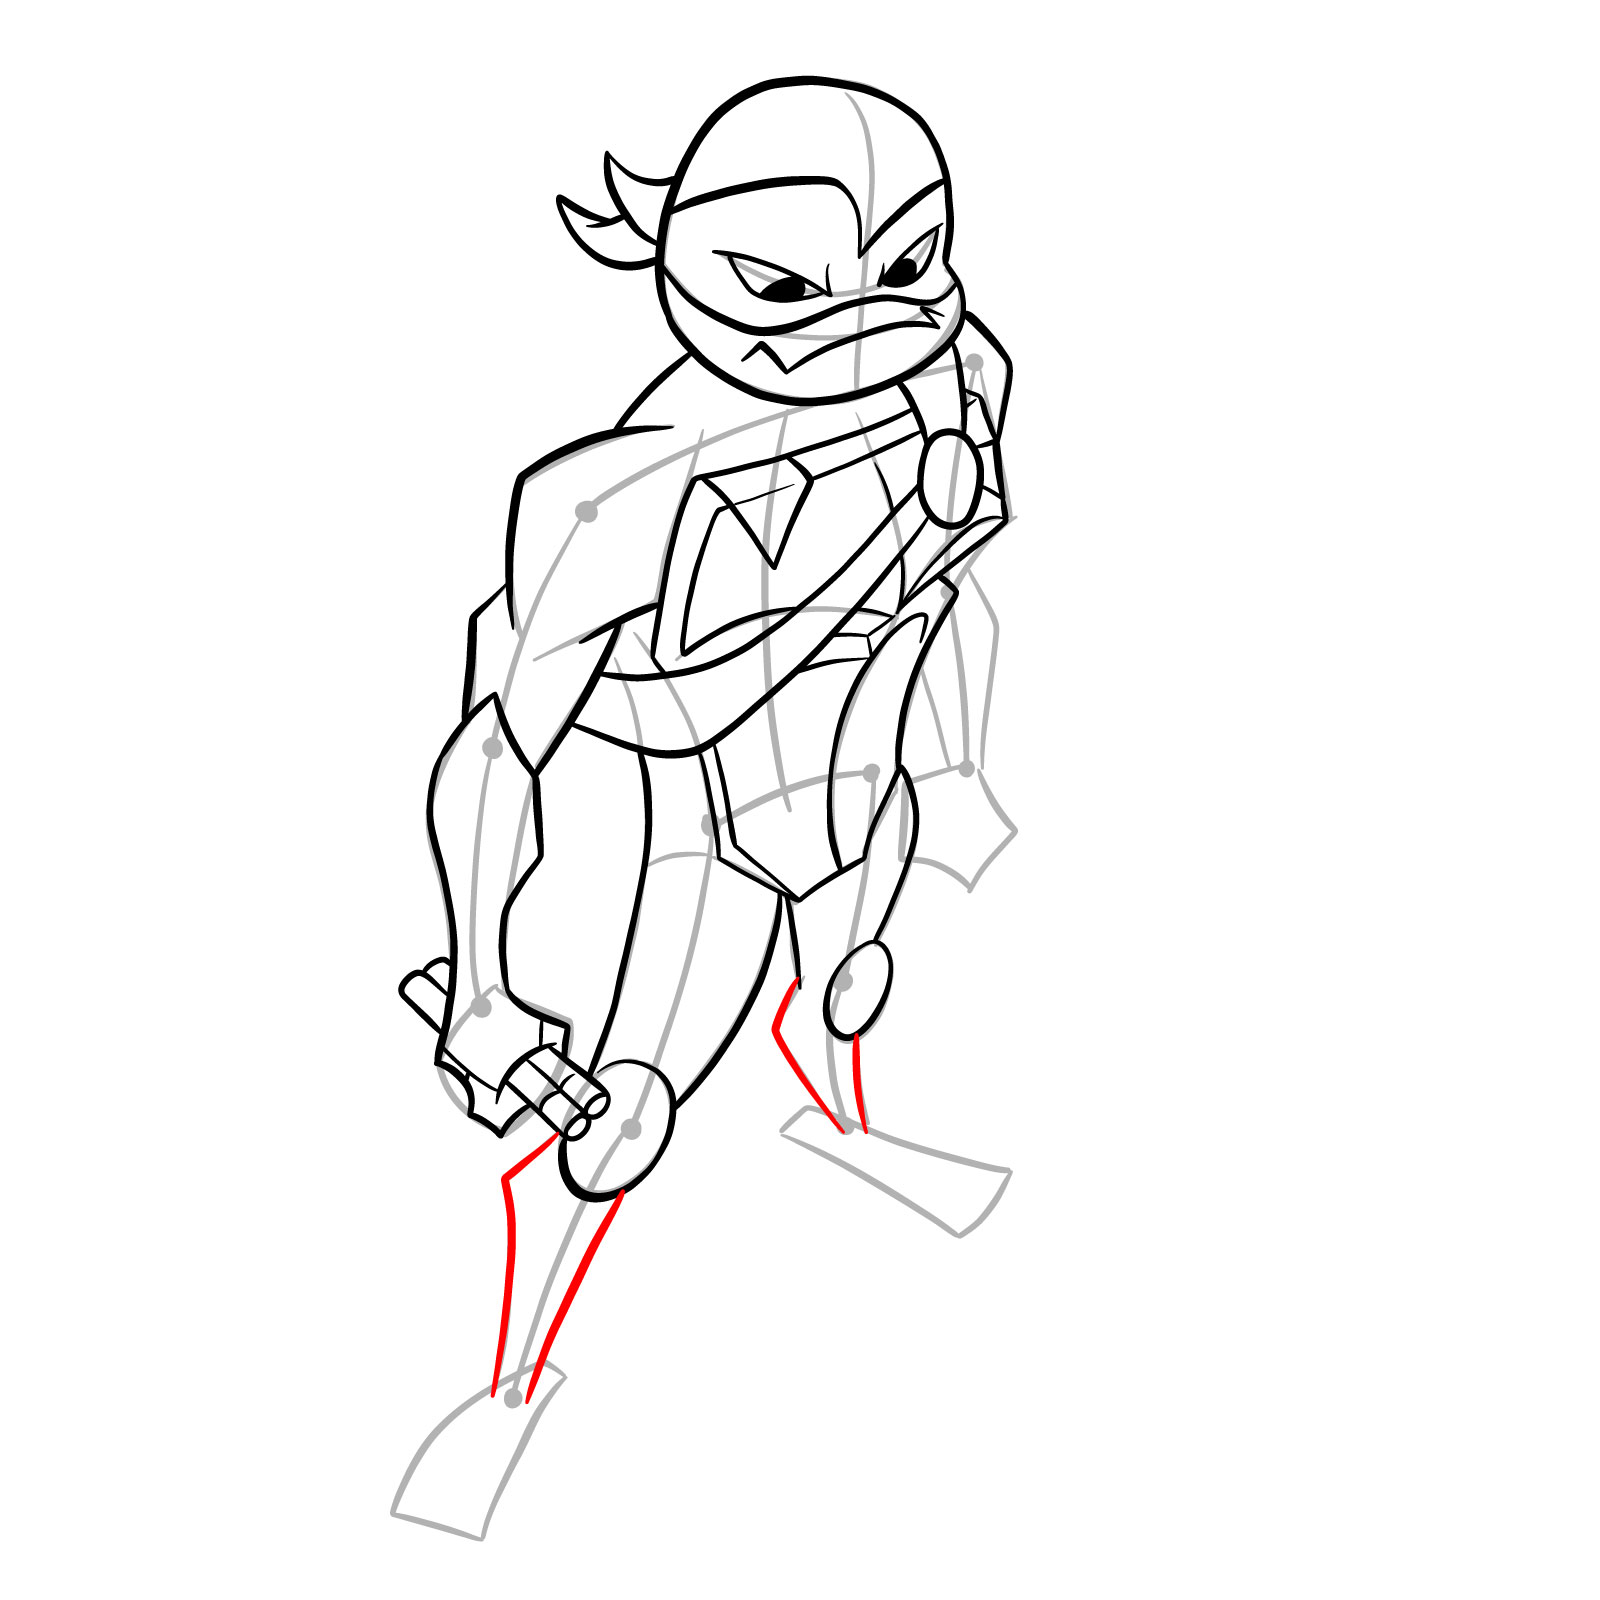 How to draw Mikey in Hamato Ninpō state - step 25